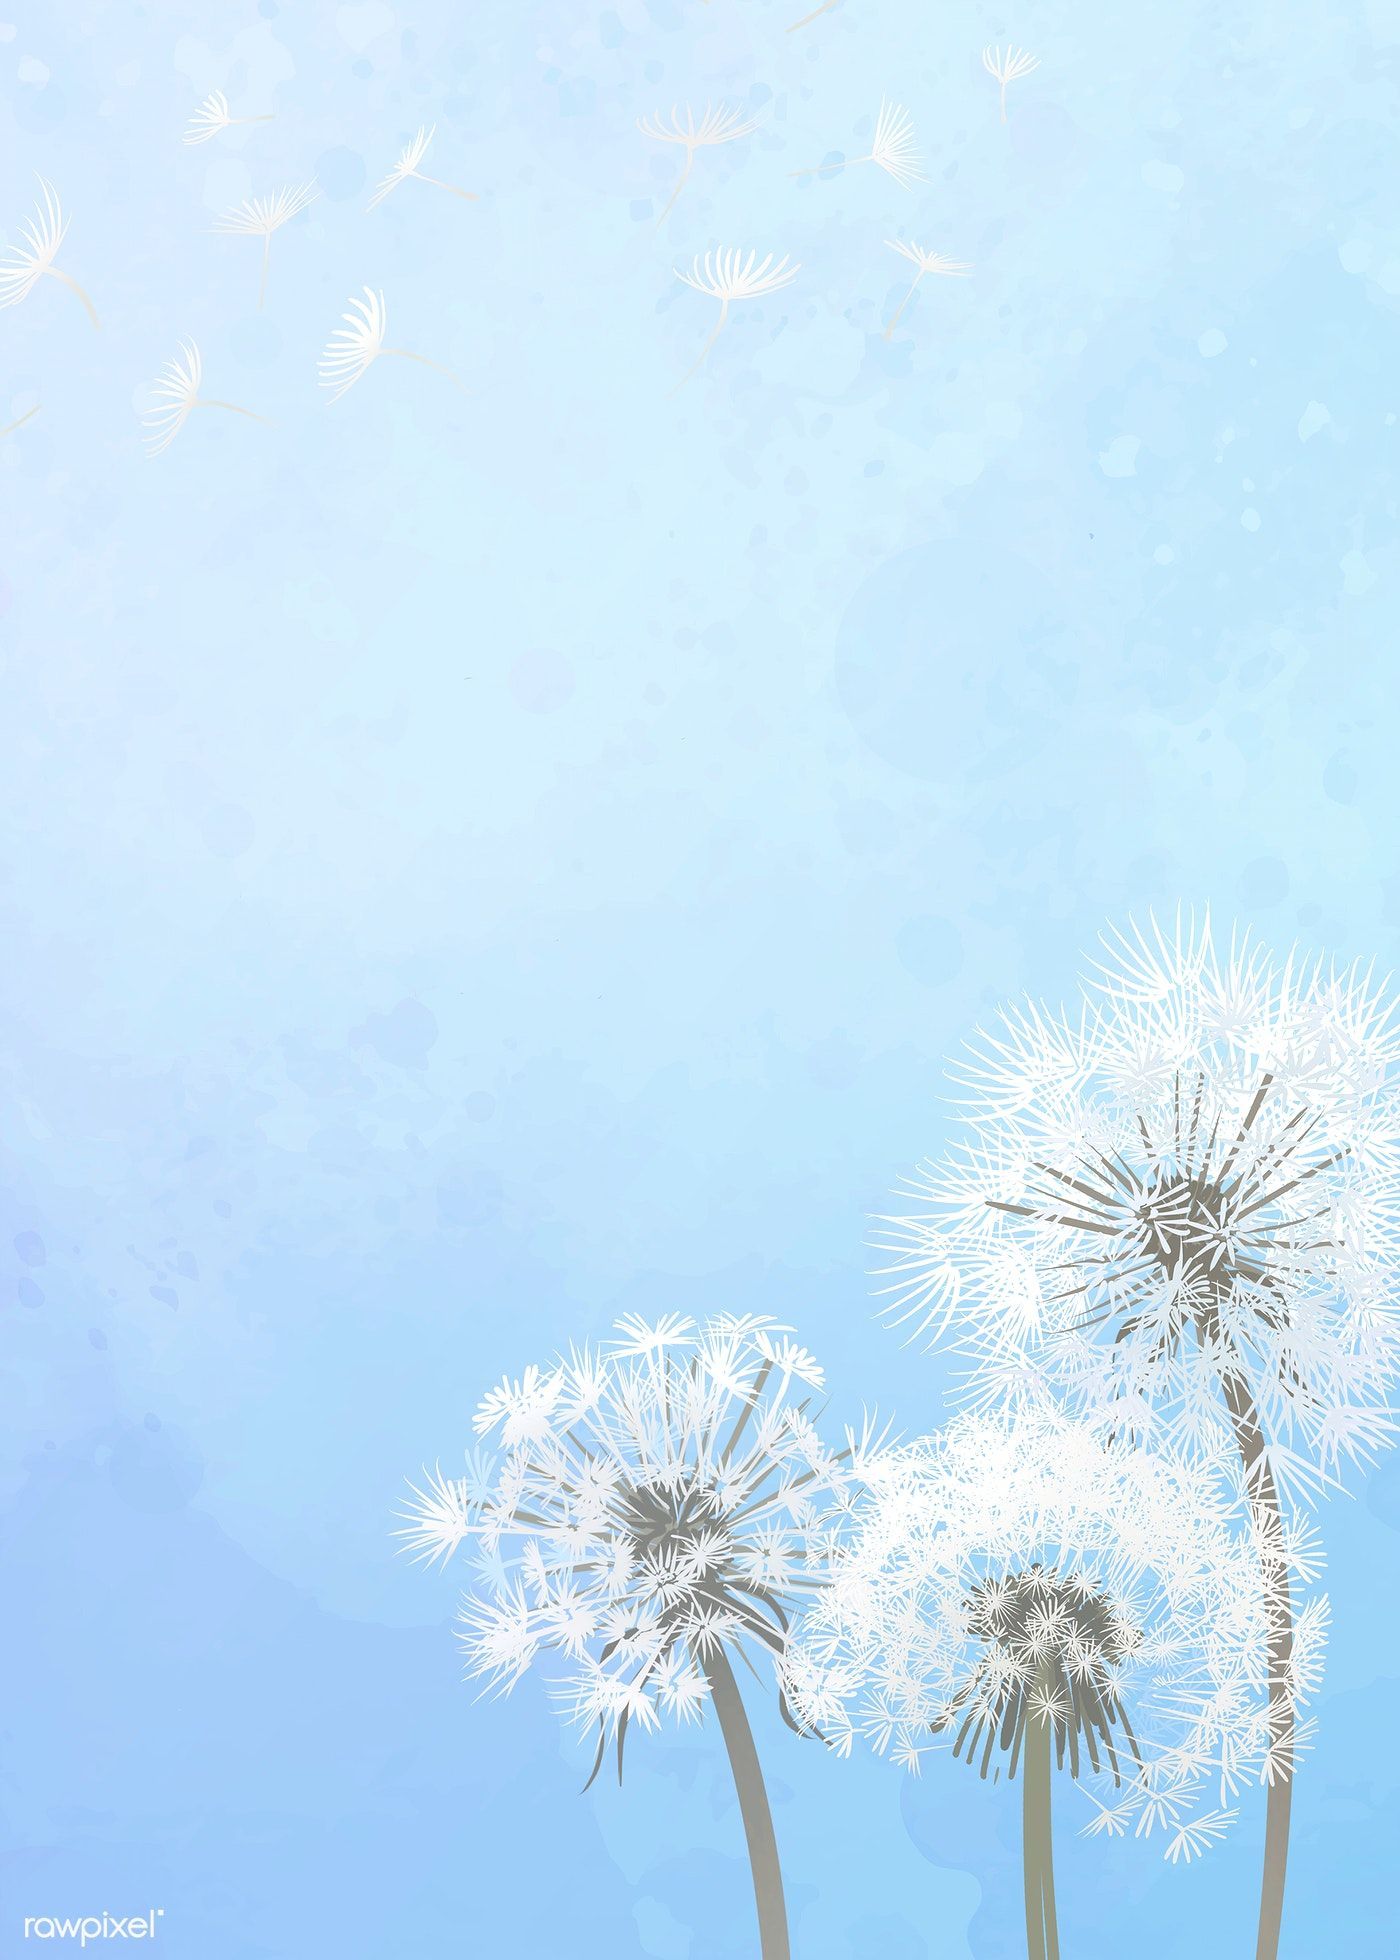 Download premium illustration of Hand drawn dandelions with a blue